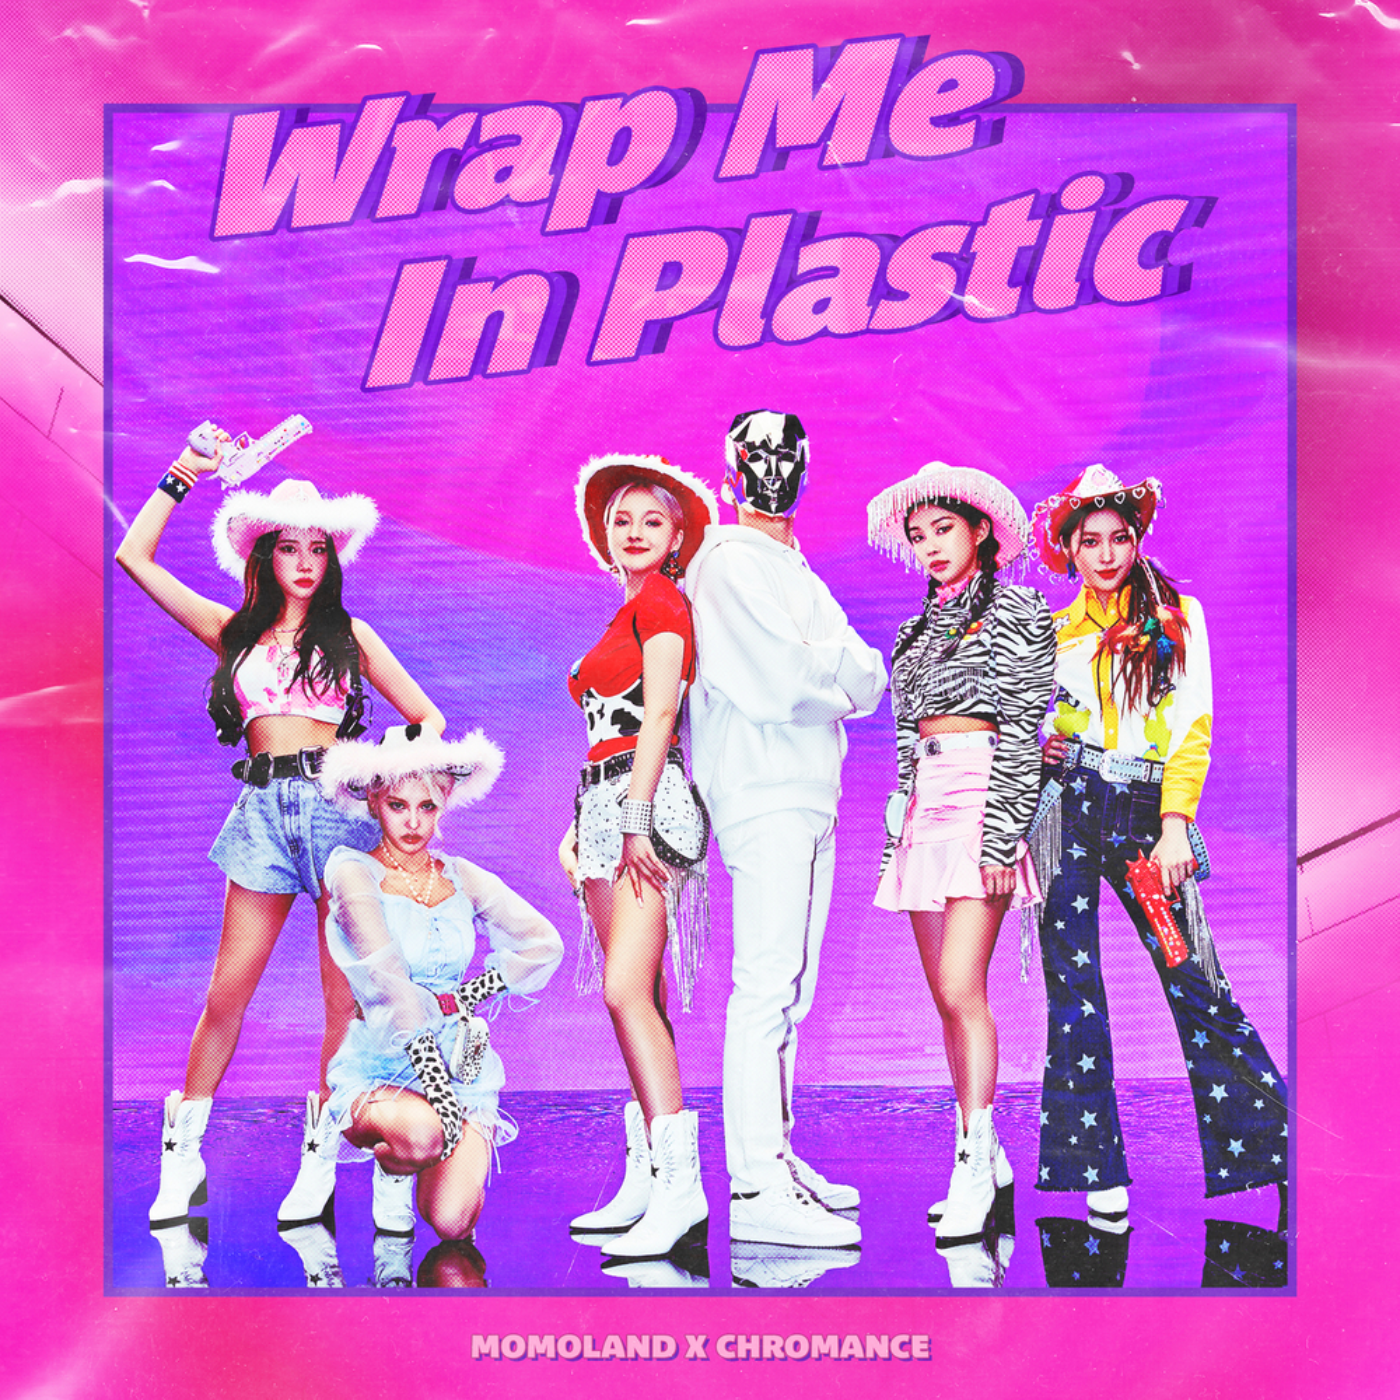 https://static.wikia.nocookie.net/kpop/images/f/f2/MOMOLAND_%26_CHROMANCE_Wrap_Me_In_Plastic_album_cover.png/revision/latest?cb=20210205093217